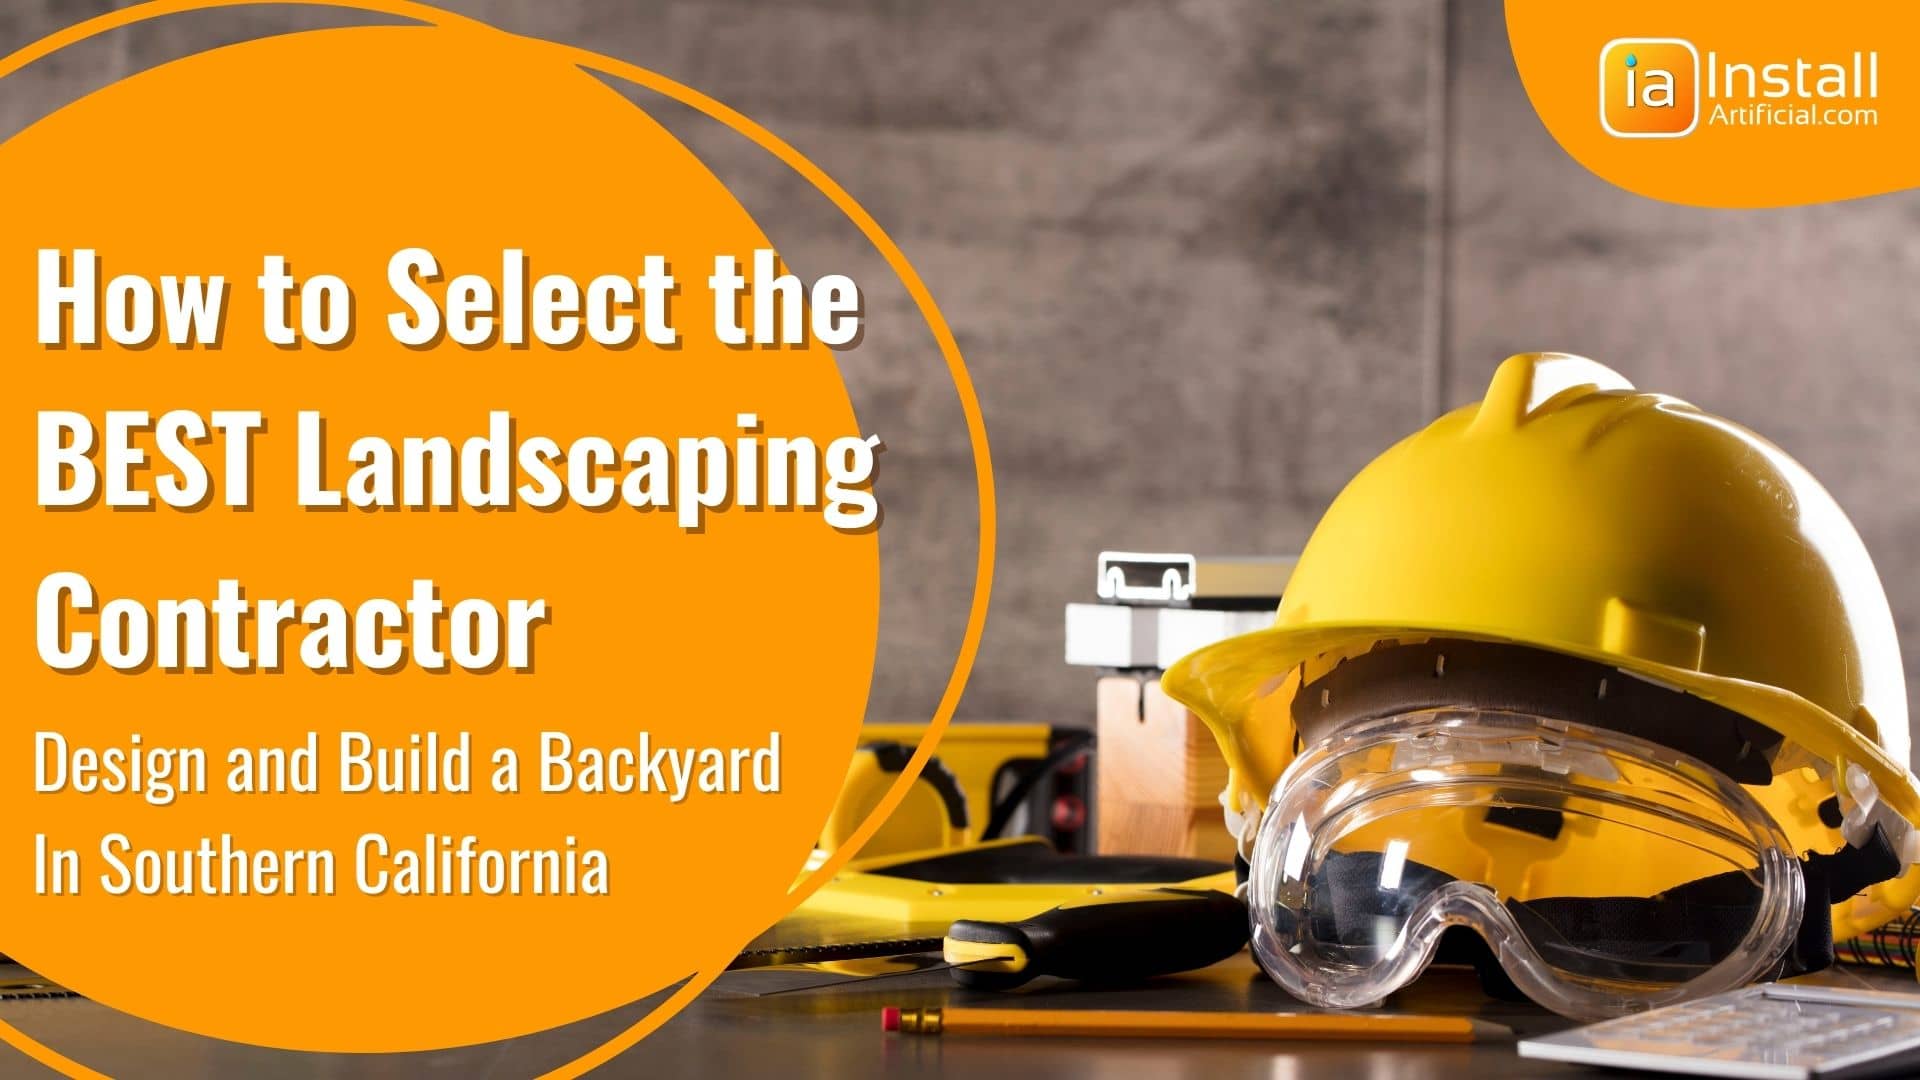 Find the Best Landscape Contractors to Design & Build a Backyard in Los Angeles